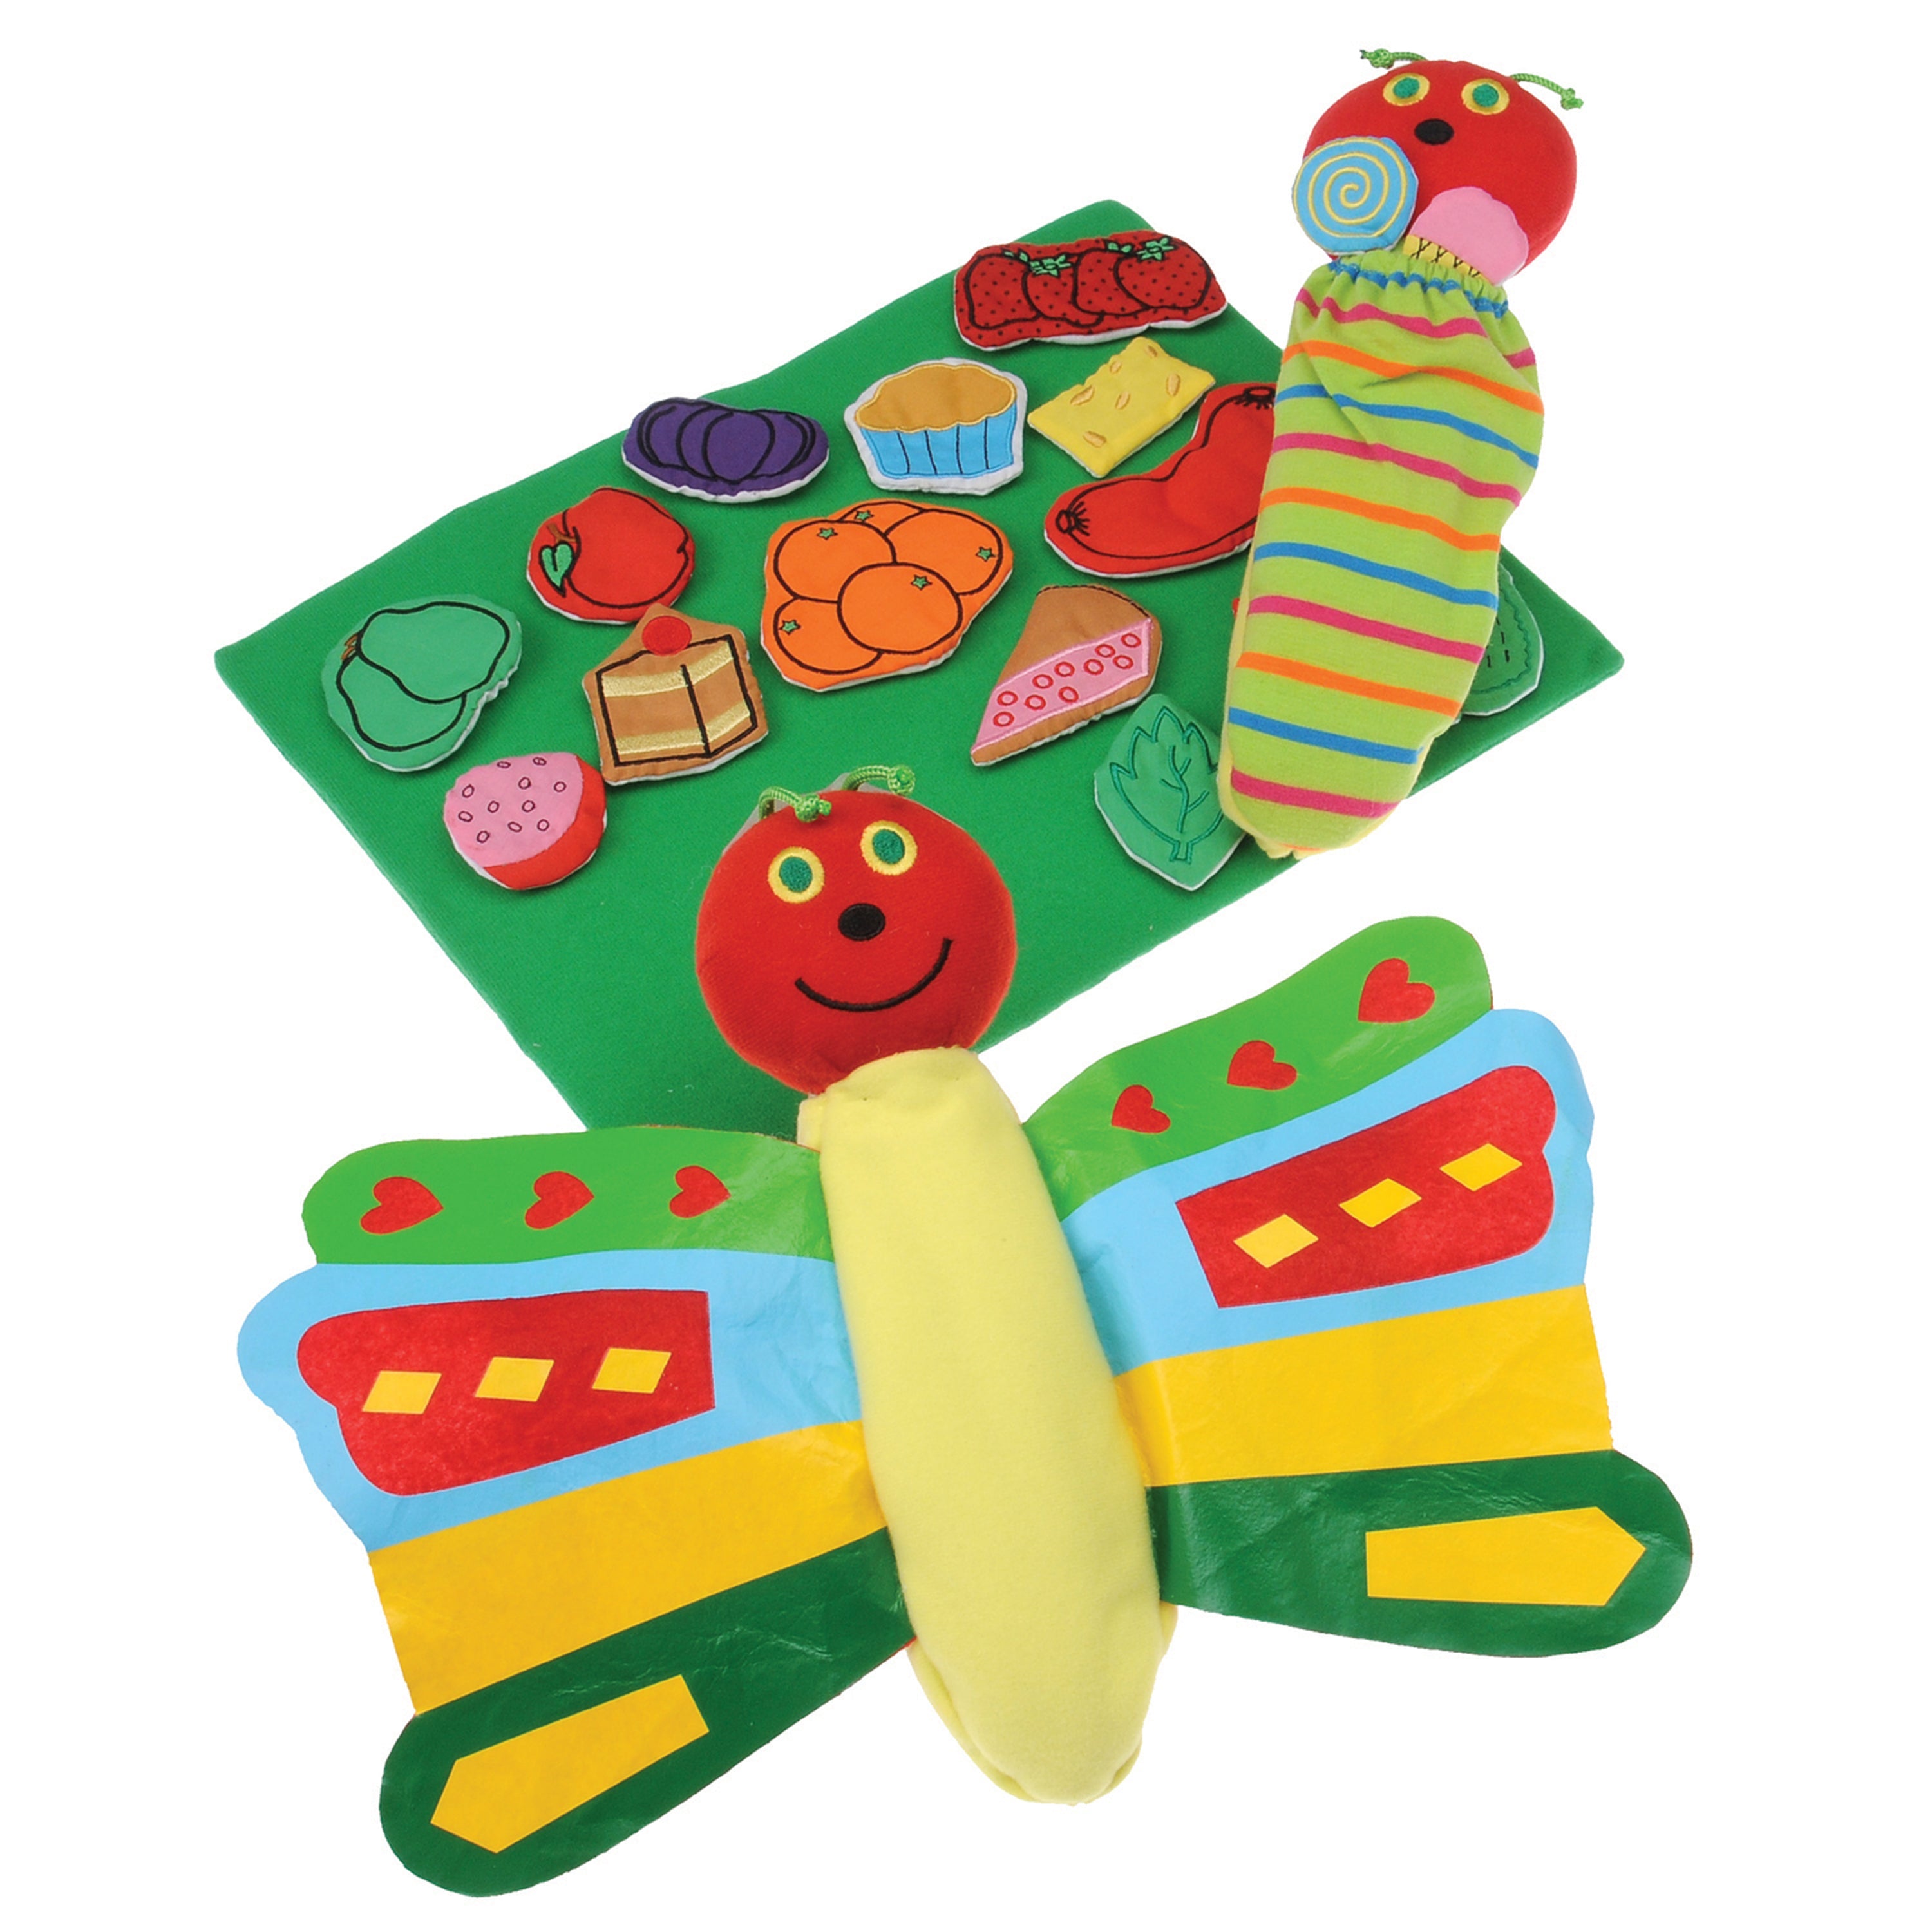 Butterfly & Props Set for The Very Hungry Caterpillar Book*